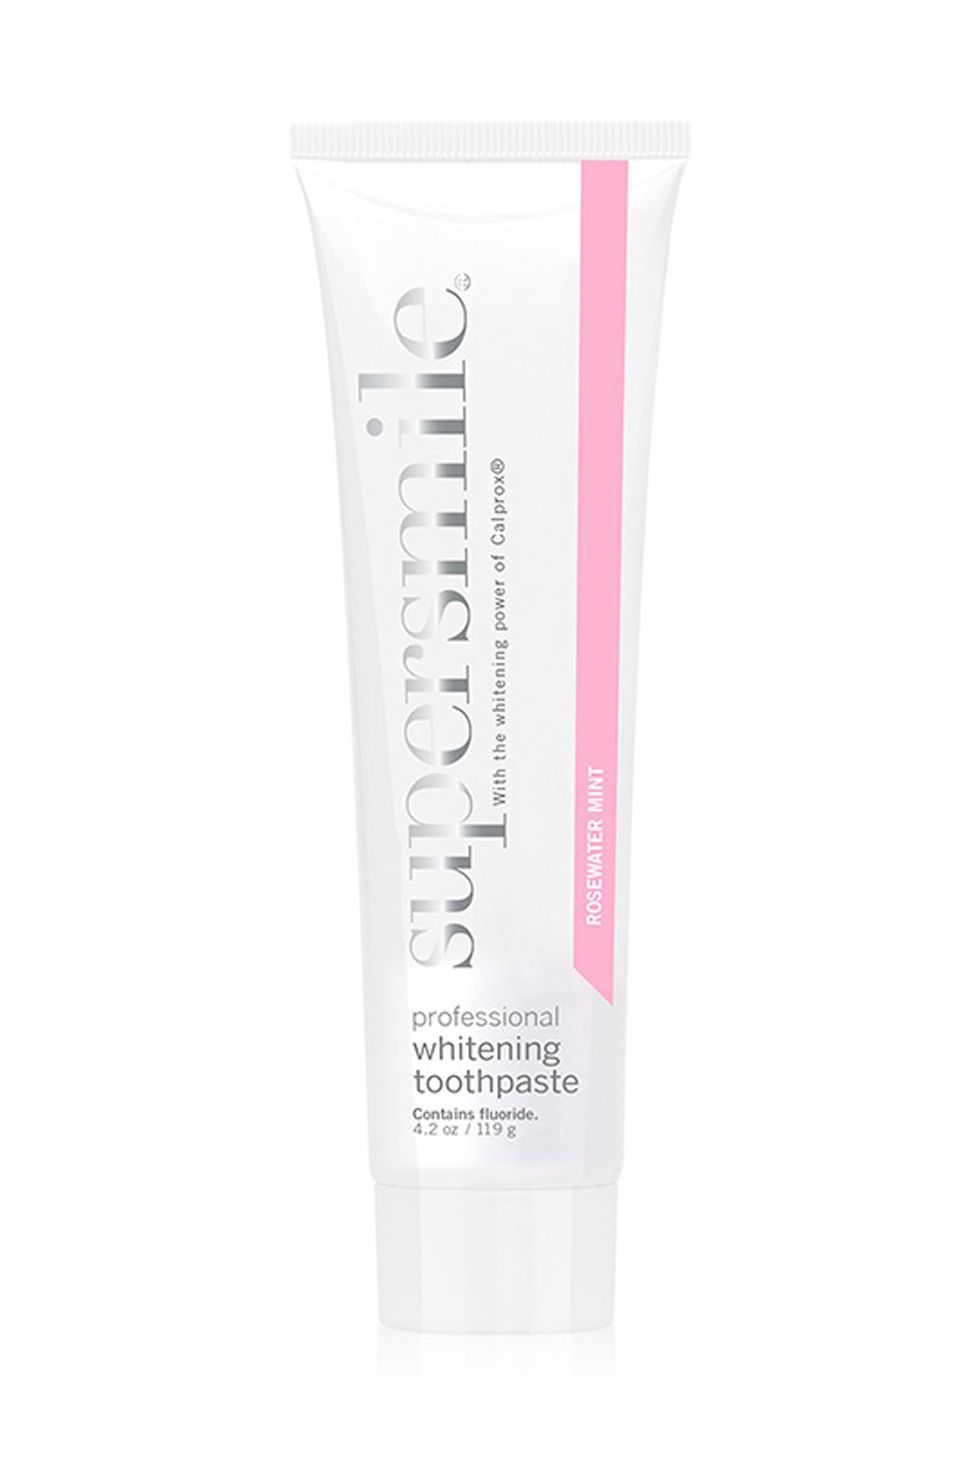 Supersmile Professional Whitening Toothpaste in Rosewater Mint